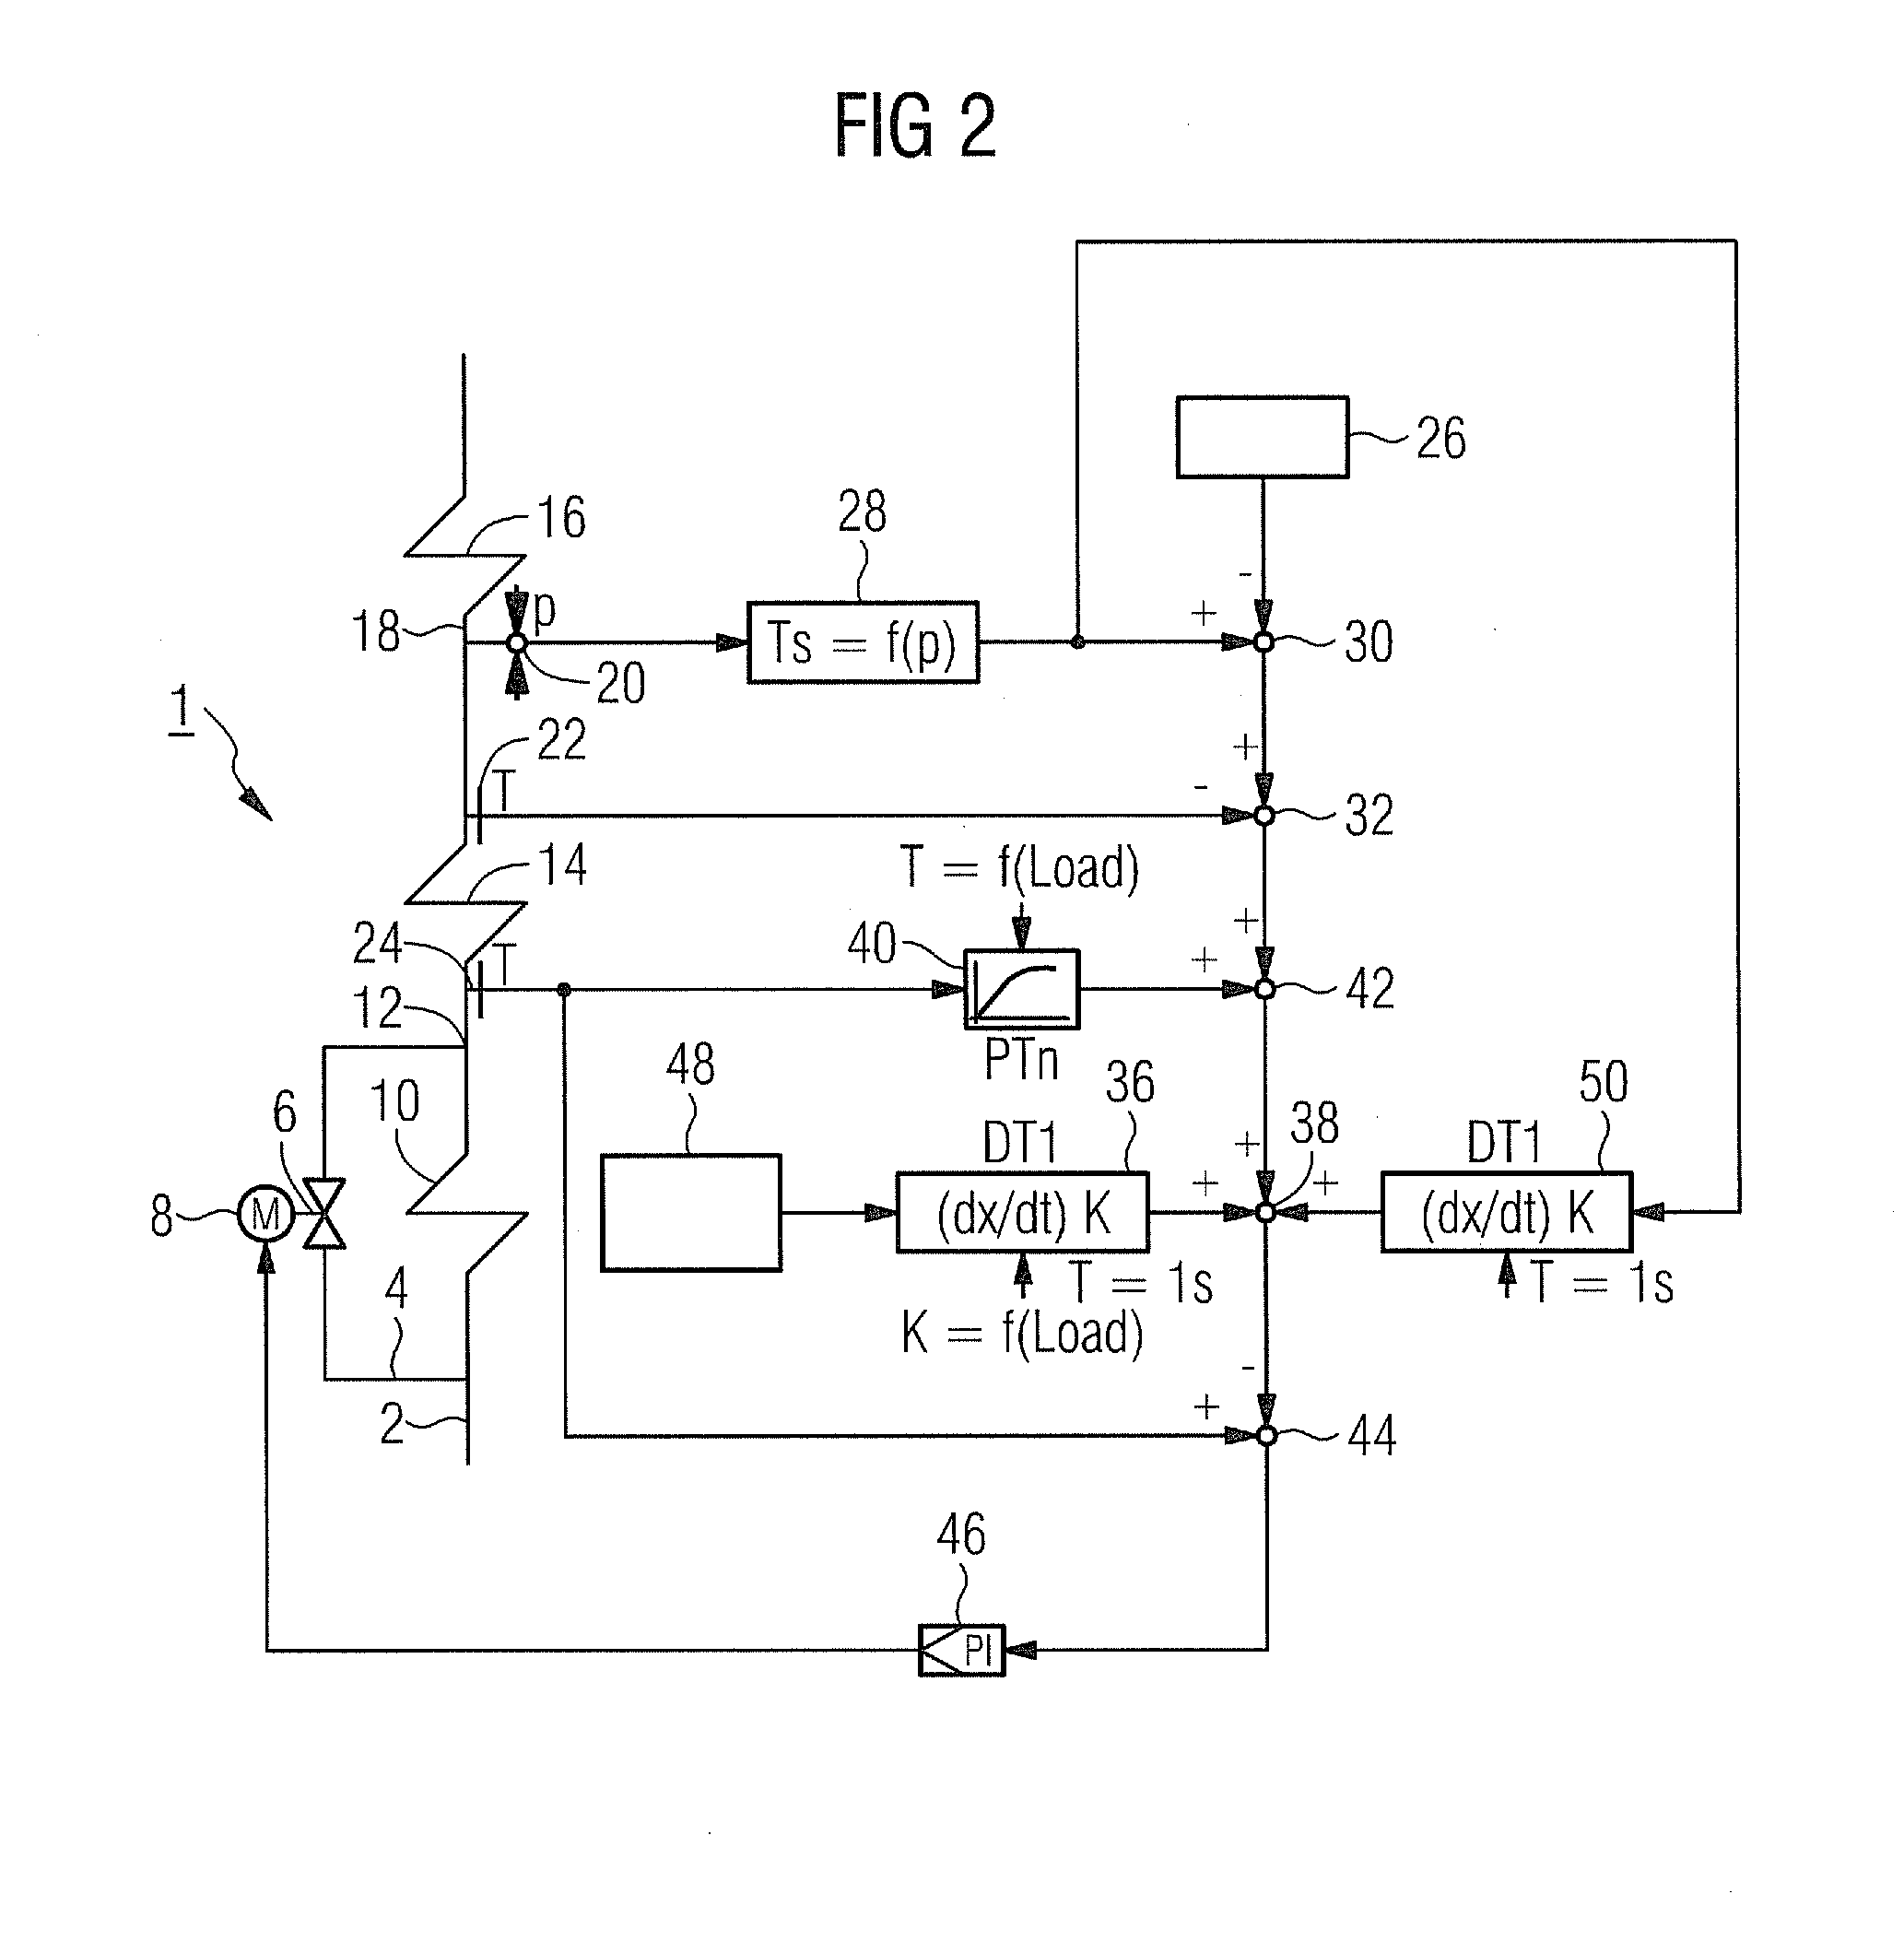 Method for Operating a Waste Heat Steam Generator